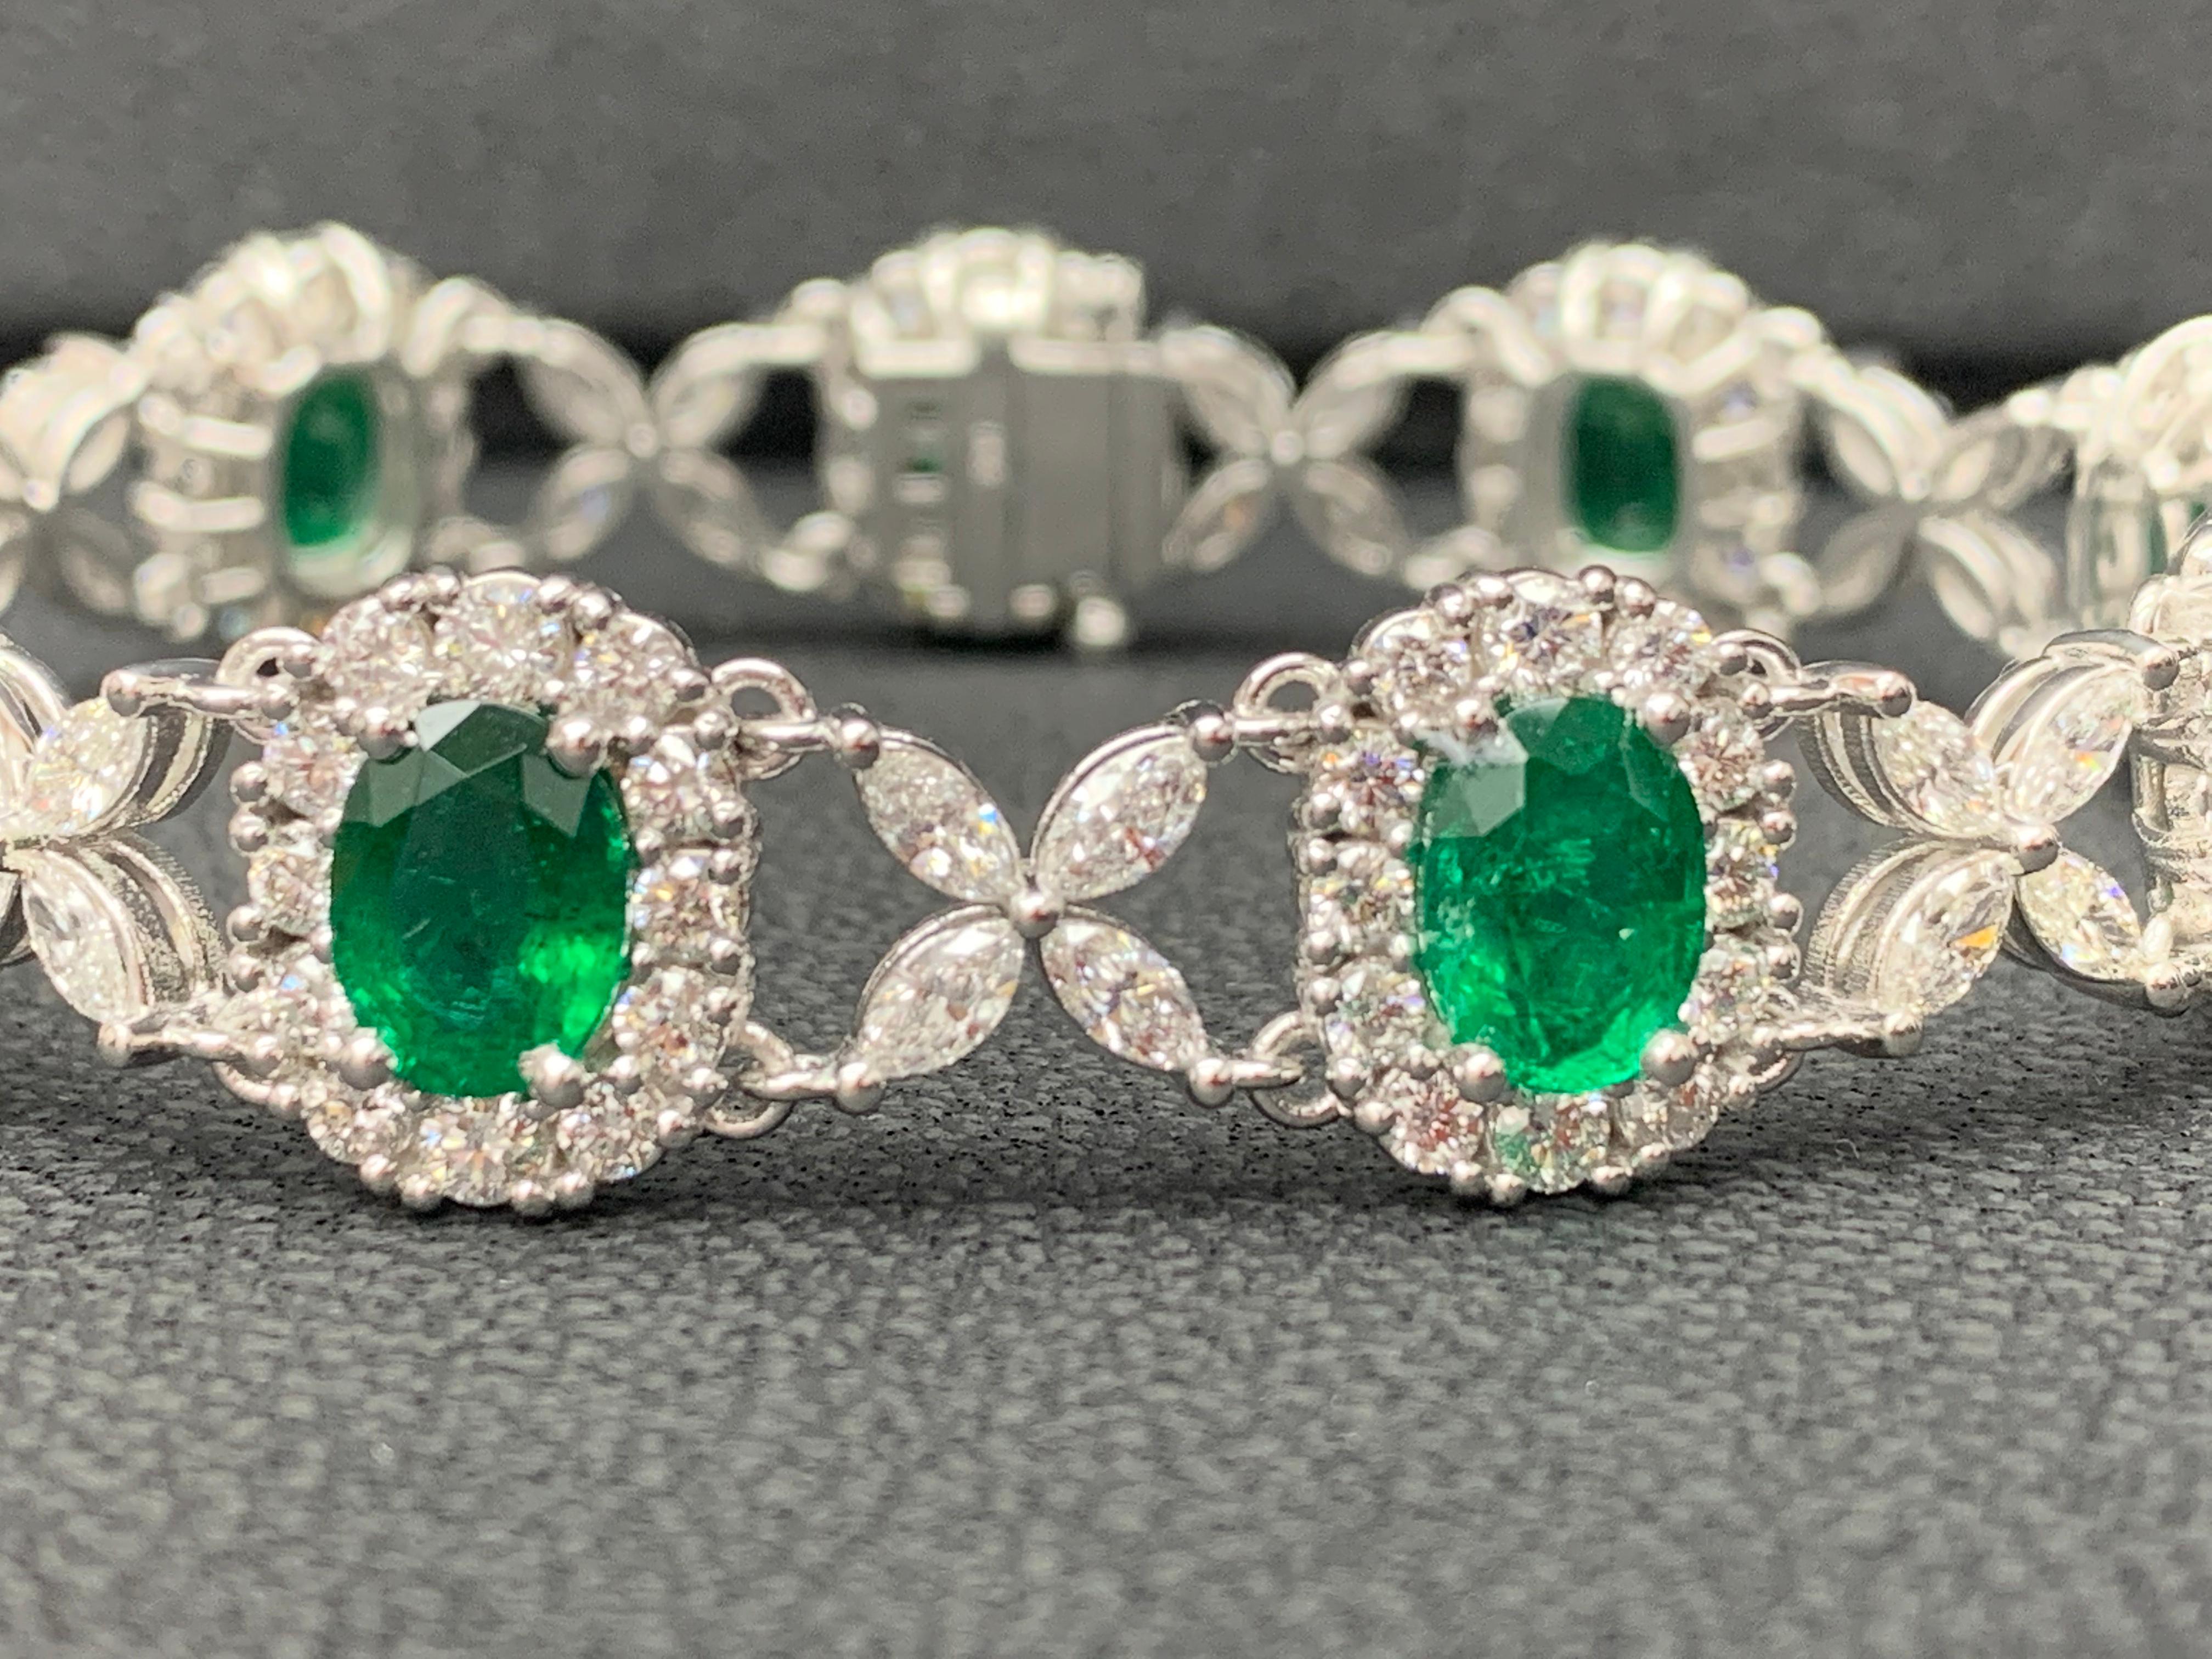 10.52 Carat Oval Cut Emerald and Diamond Tennis Bracelet in 14K White Gold For Sale 4